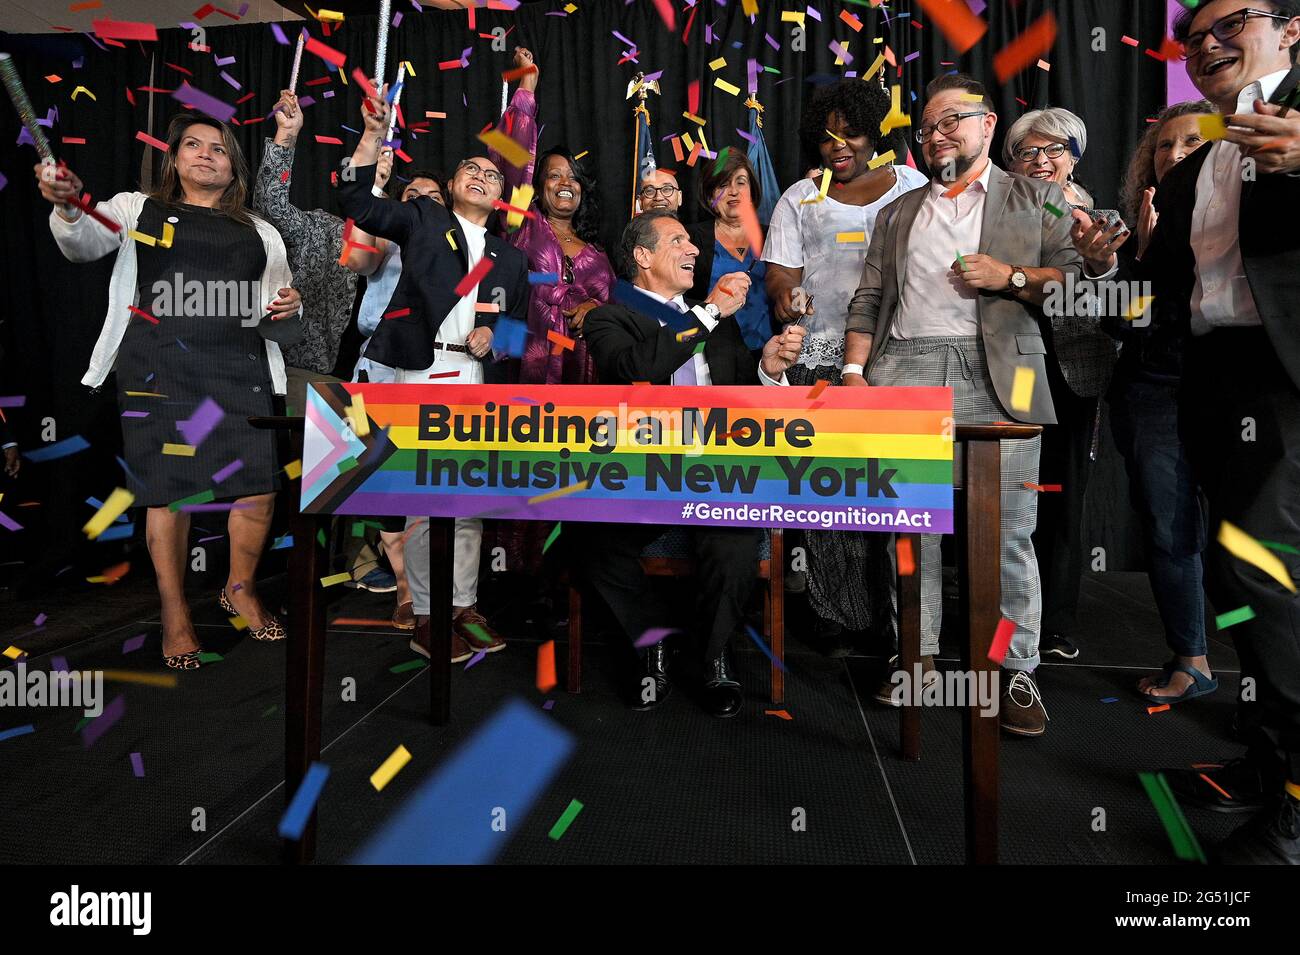 New York, USA. 24th June, 2021. People celebrate after New York Gov. Andrew Cuomo (seated) signs the Gender Recognition Act on the 10th anniversary of the Marriage Equality Act, in honor of Pride Week, at Pier 59 in New York, NY, June 24, 2021. The Gender Recognition Act extends protections for transgender and non-binary New Yorker, allowing people to change their gender on their birth certificates to conform to how they identify themselves. (Photo by Anthony Behar/Sipa USA) Credit: Sipa USA/Alamy Live News Stock Photo